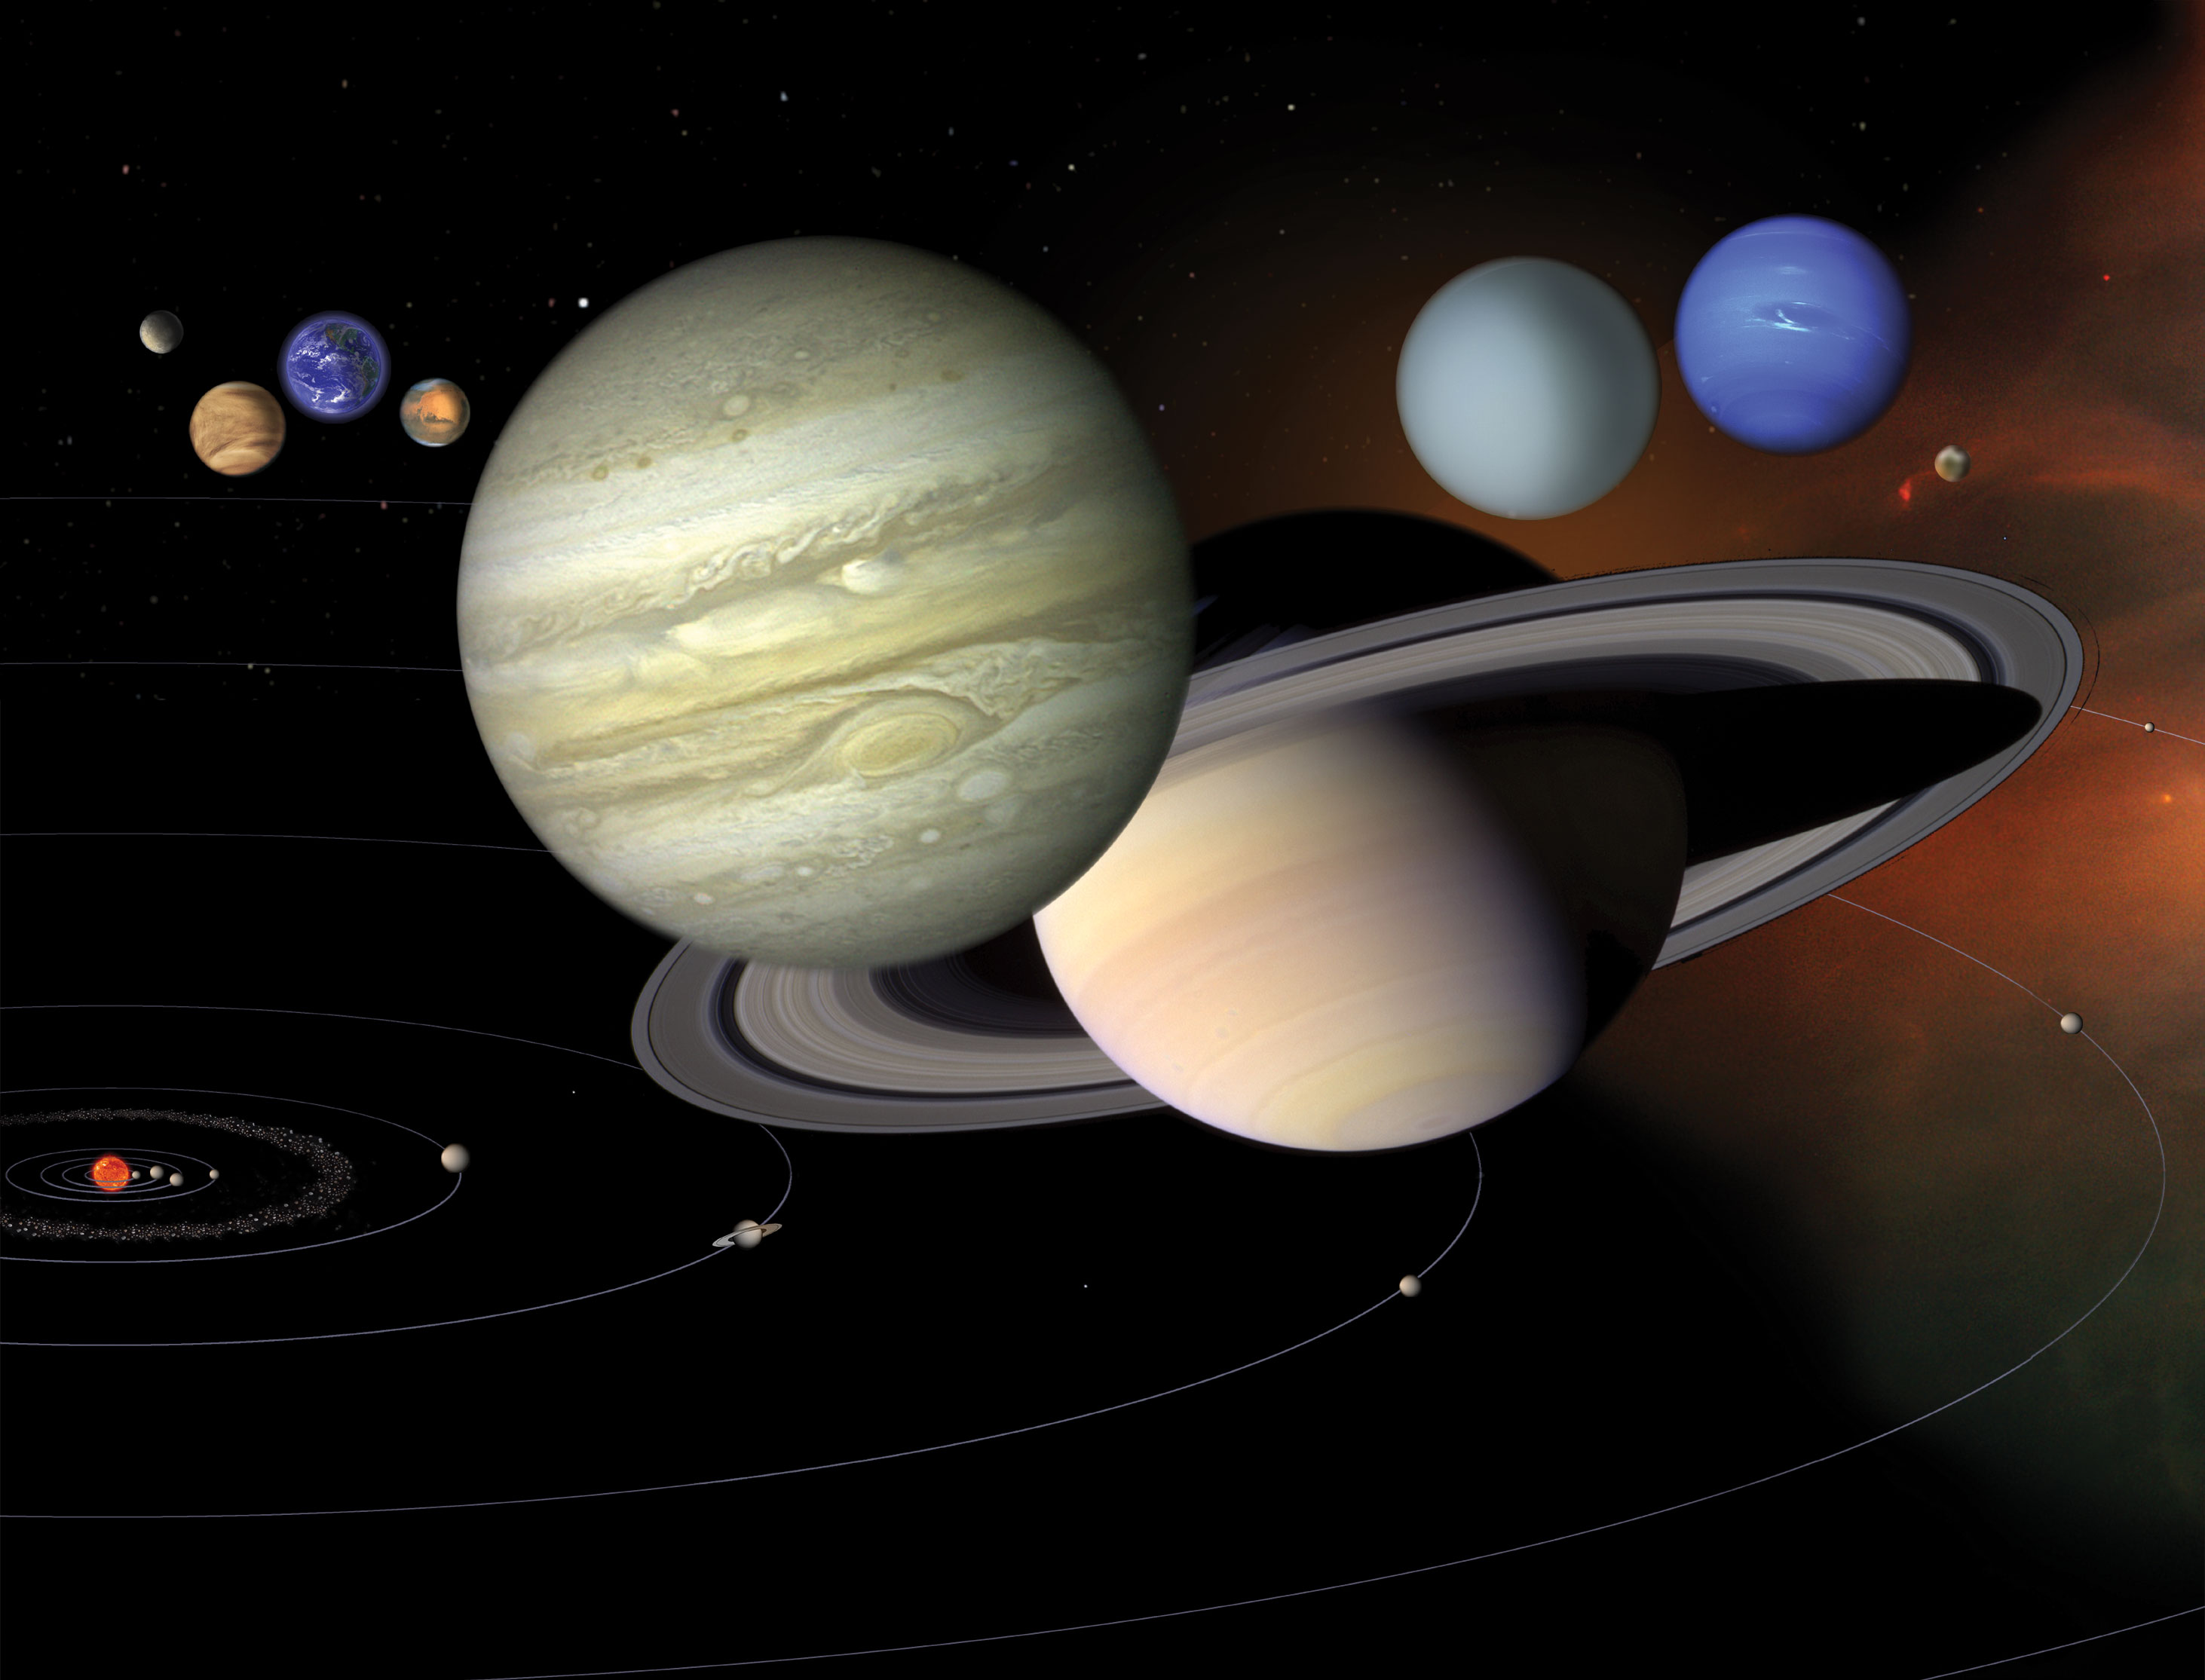 A montage shows the planets to scale from Mercury on the left to Neptune on the right.